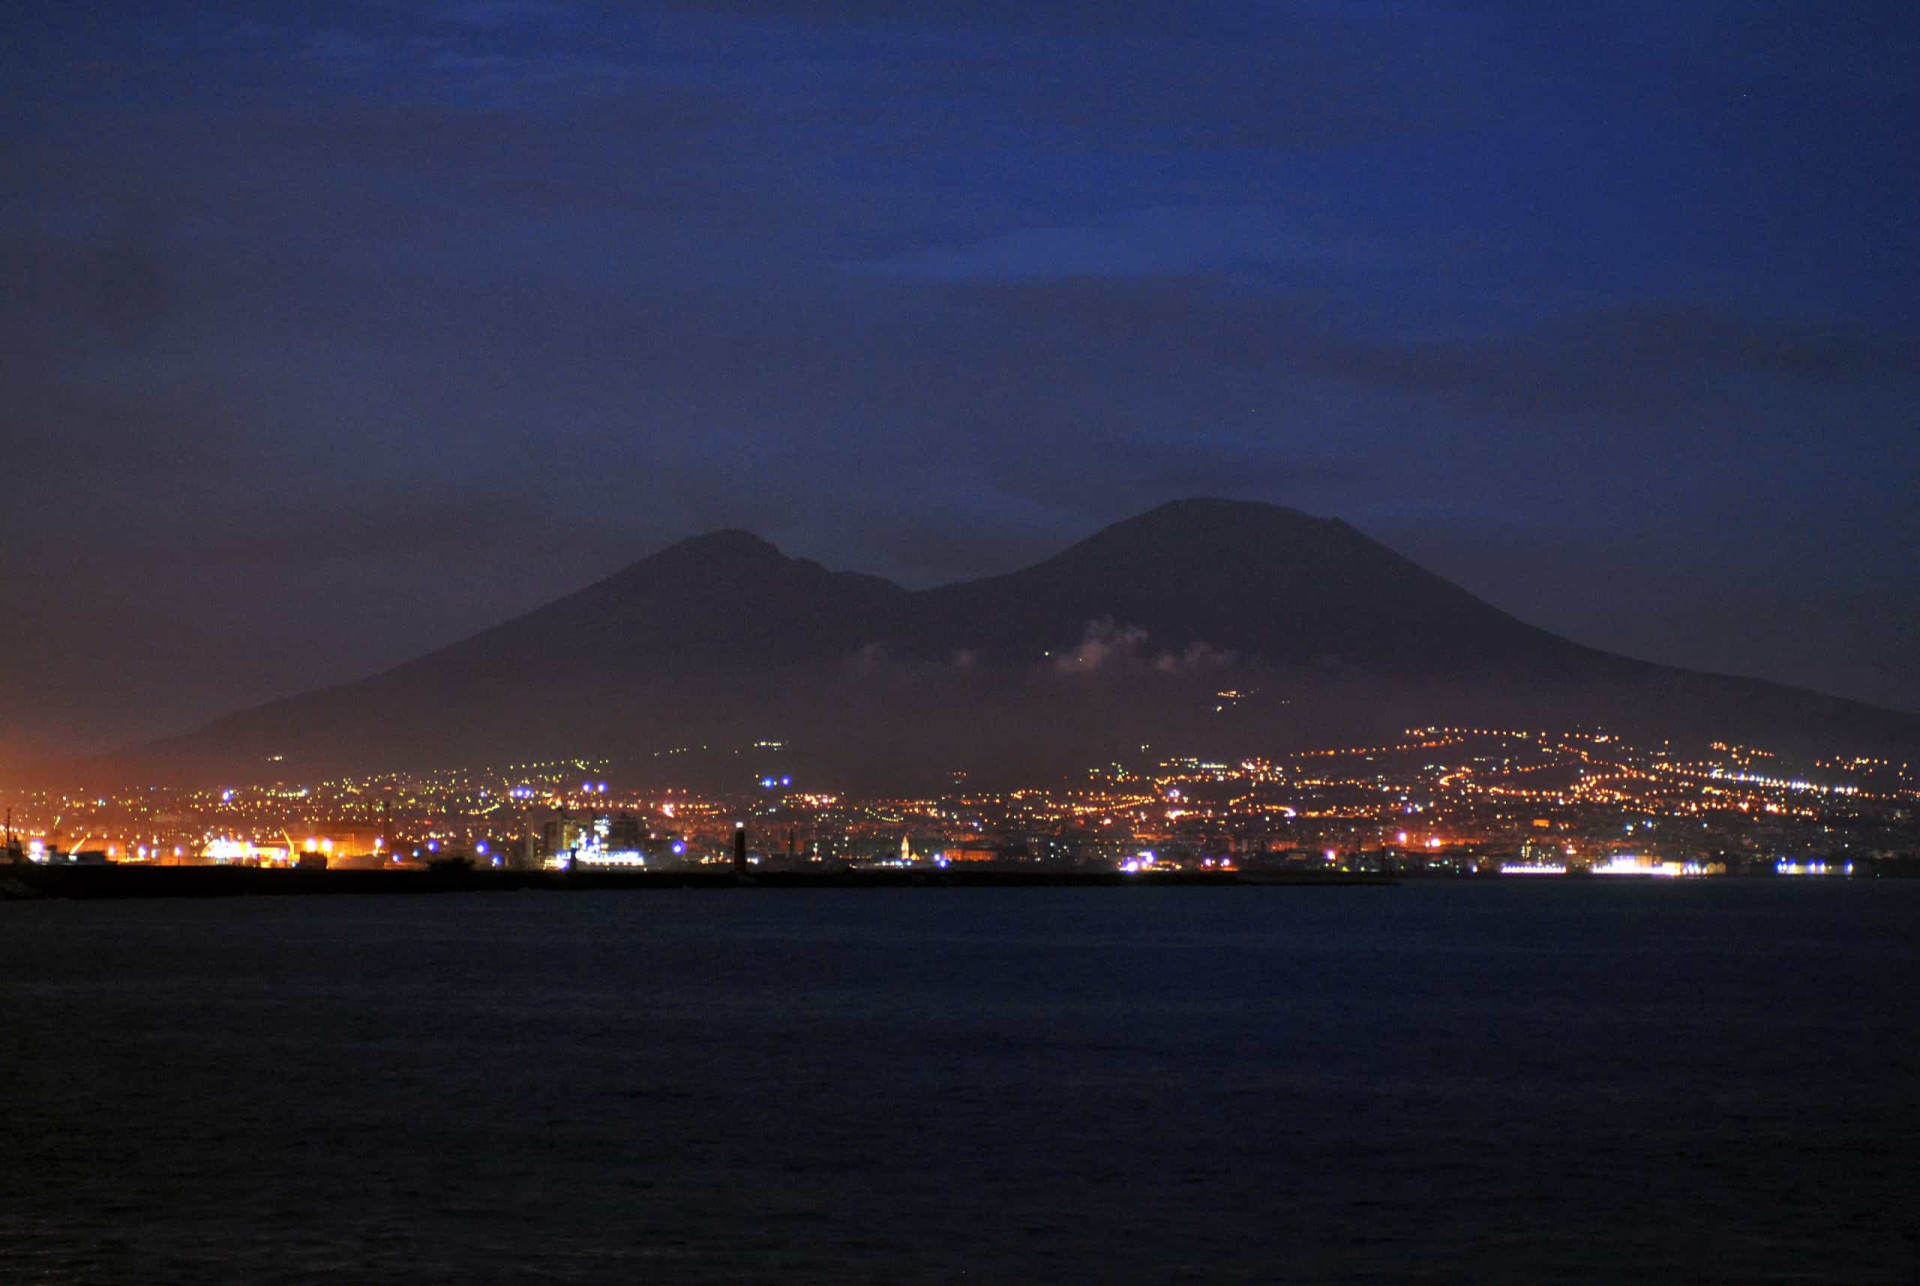 Remember that Vesuvius is still technically an active volcano, so if you are easily frightened perhaps best to go there when it is very much dormant!<p>You may also like:<a href="https://www.starsinsider.com/n/499061?utm_source=msn.com&utm_medium=display&utm_campaign=referral_description&utm_content=450429v6en-us"> Fascinating facts about the Incas</a></p>